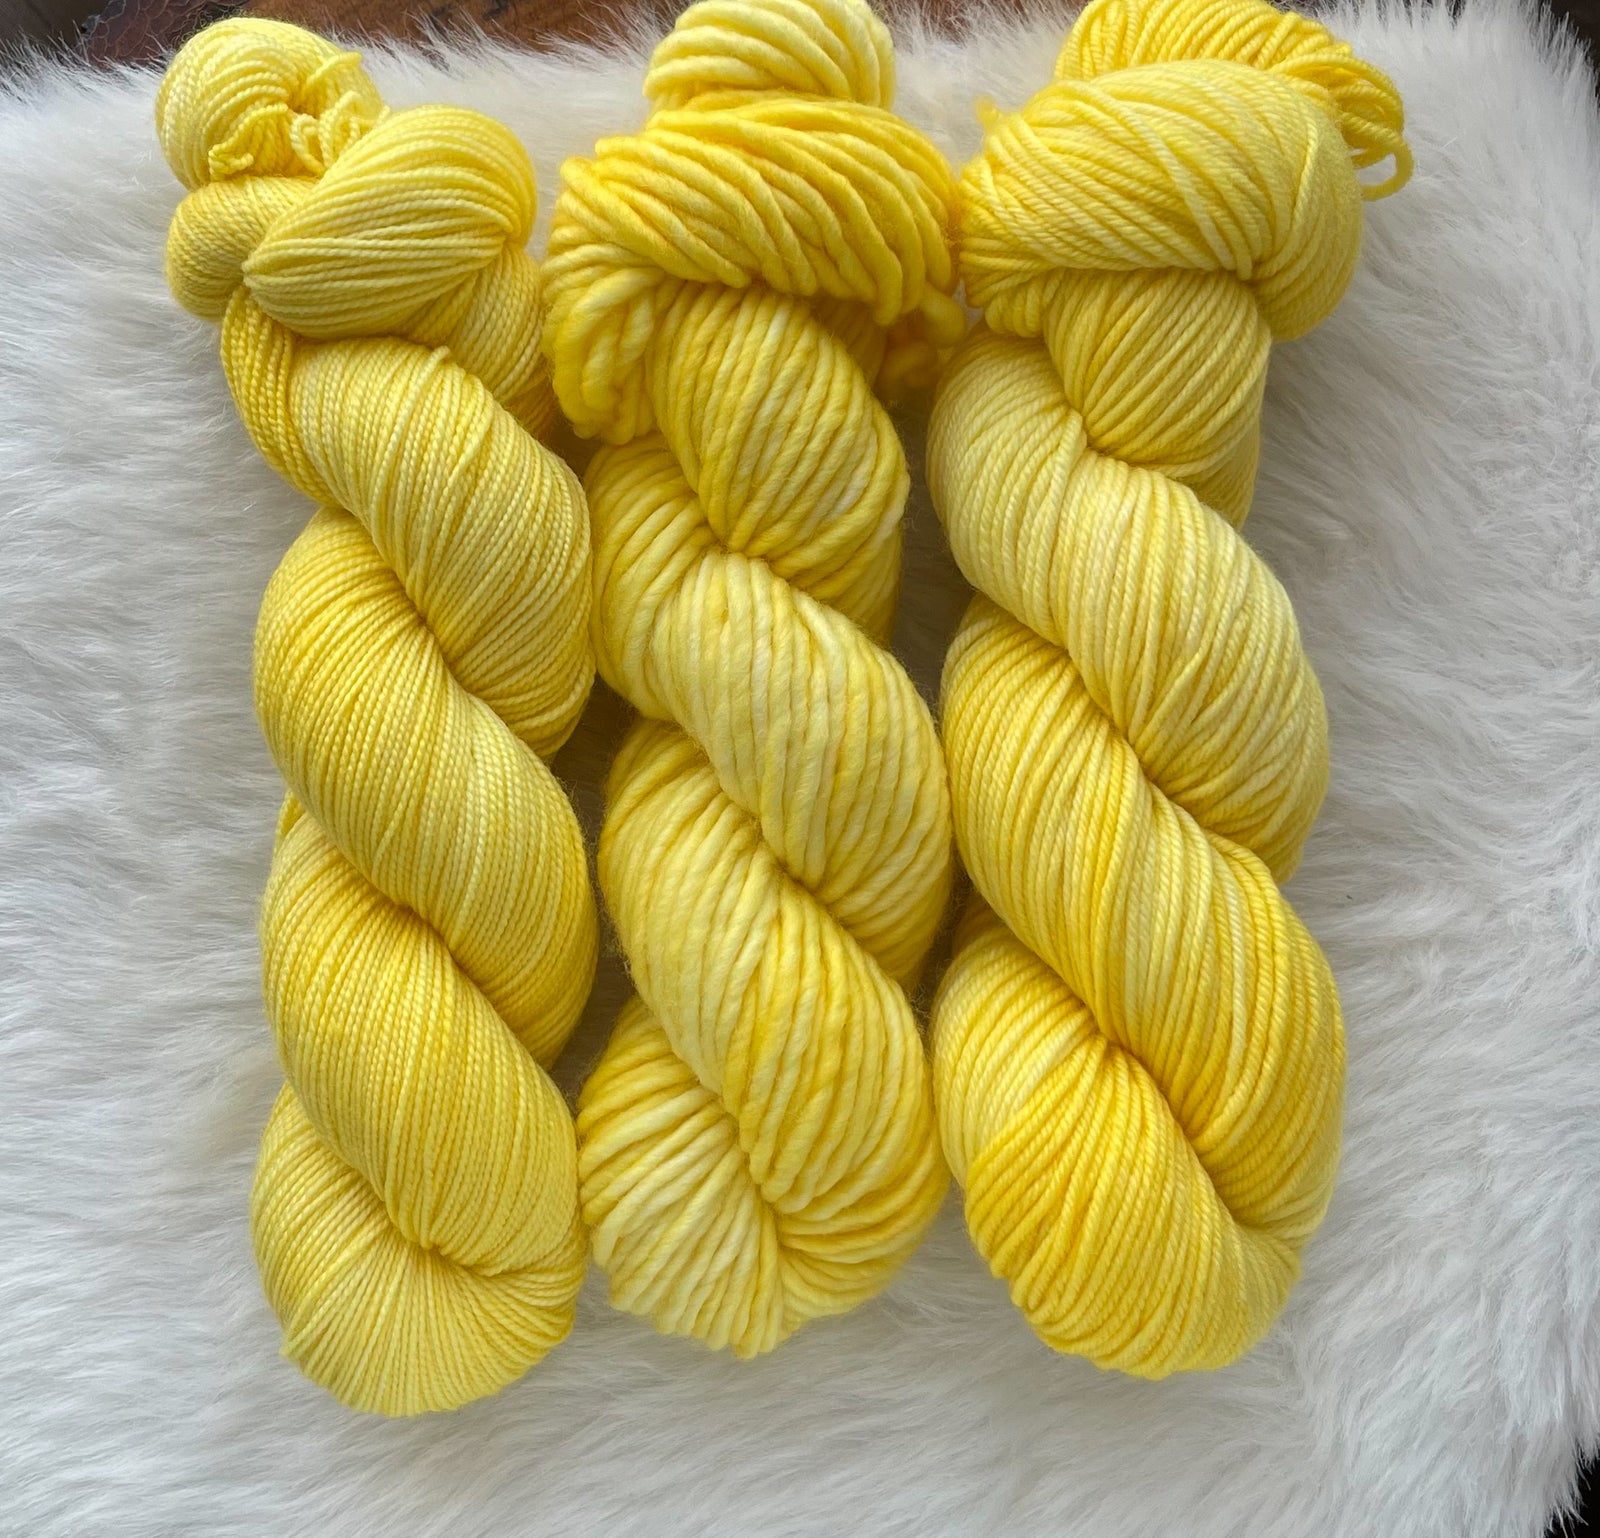 1 Skein 2 Skeins Available Dye Lot 3998 Lion Brand Jiffy -  New Zealand